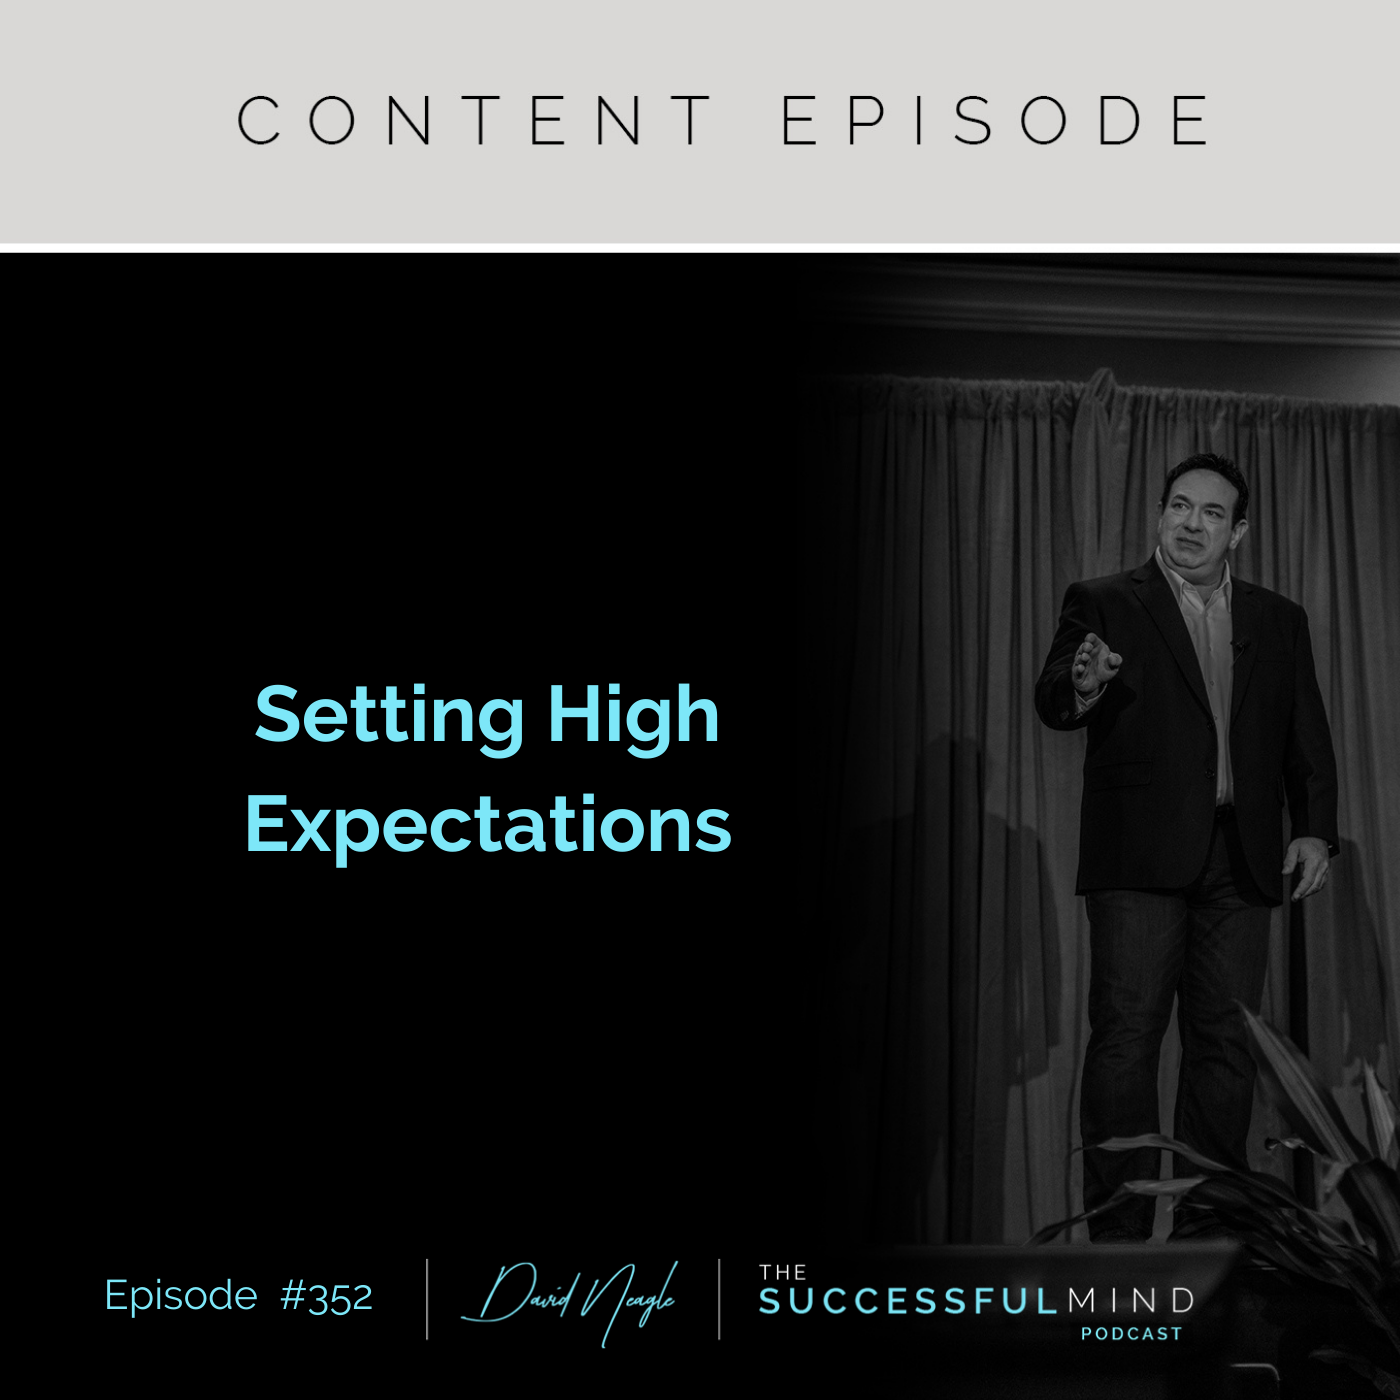 The Successful Mind Podcast - Episode 352 - Setting High Expectations